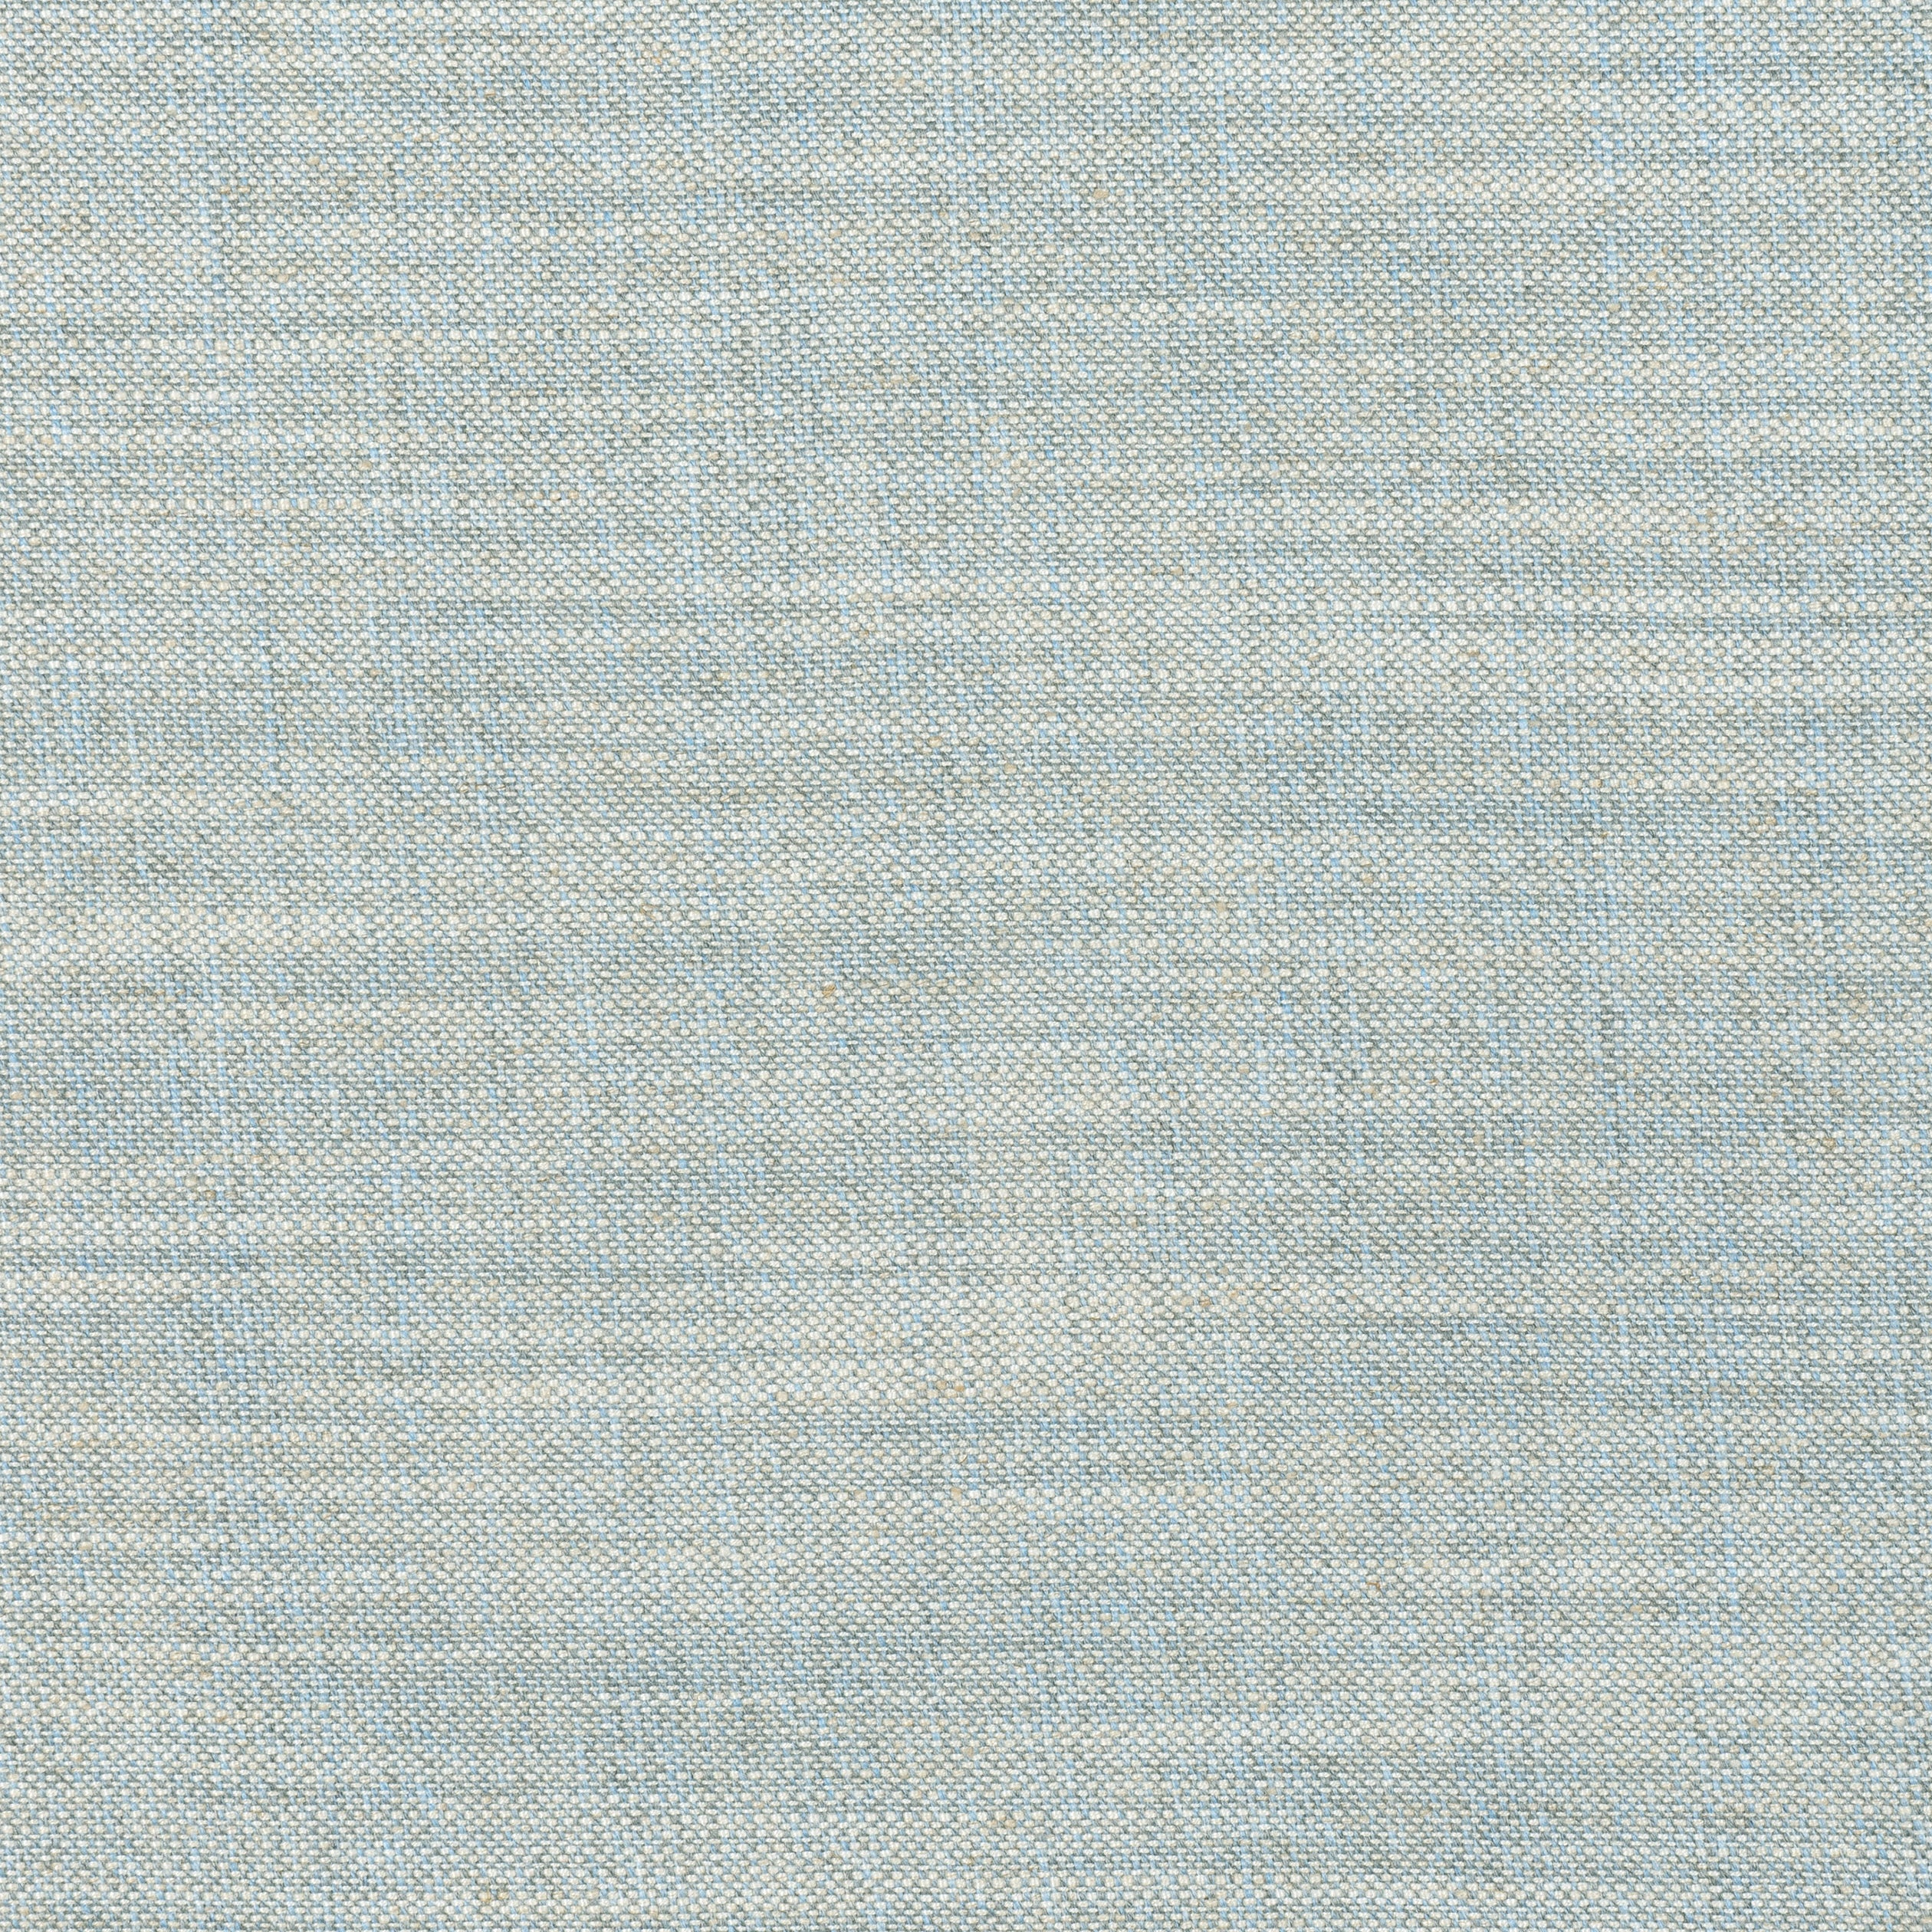 Terra Linen fabric in slate color - pattern number FWW7678 - by Thibaut in the Palisades collection